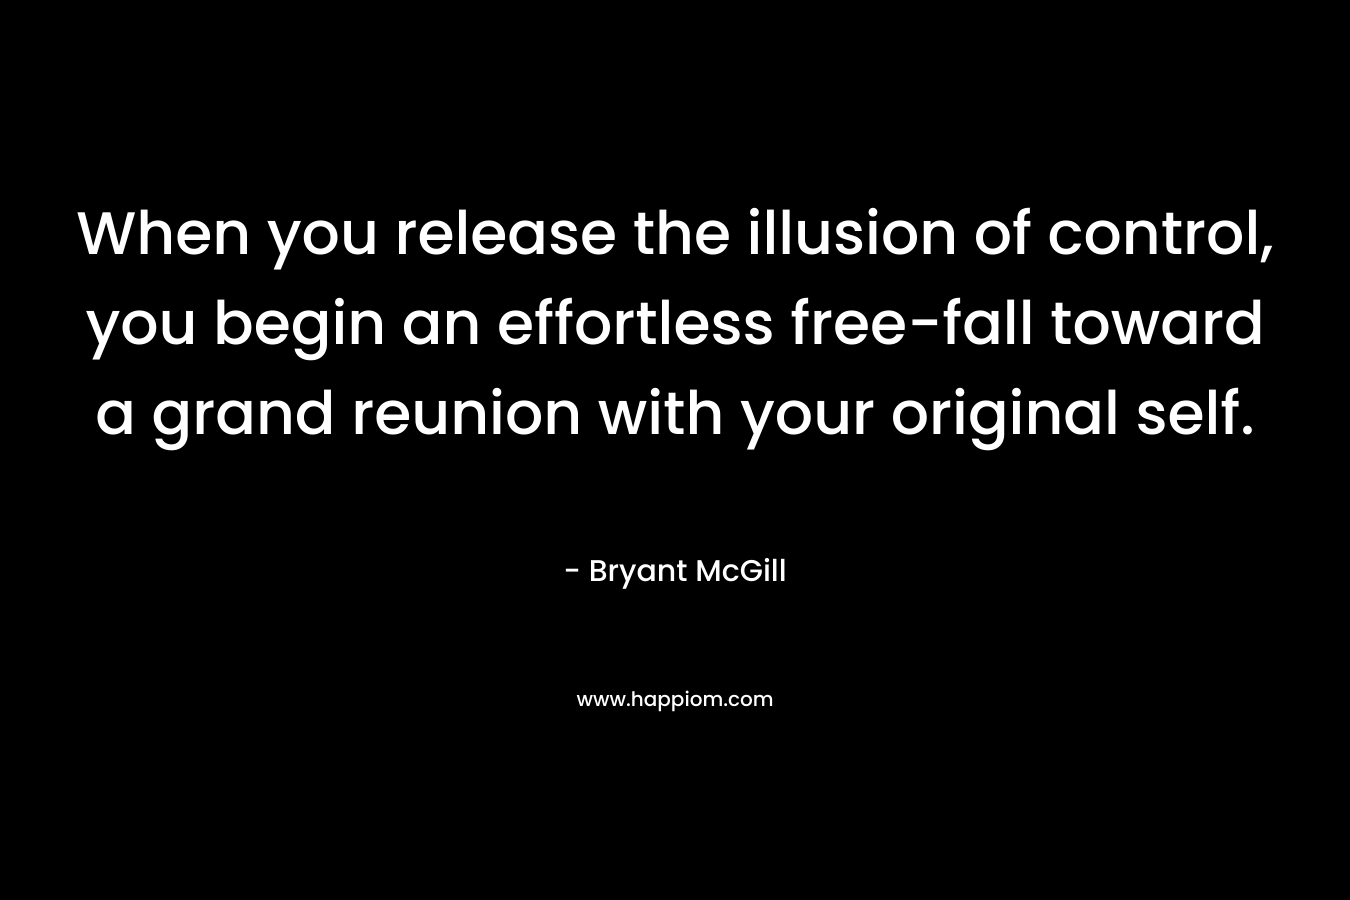 When you release the illusion of control, you begin an effortless free-fall toward a grand reunion with your original self. – Bryant McGill